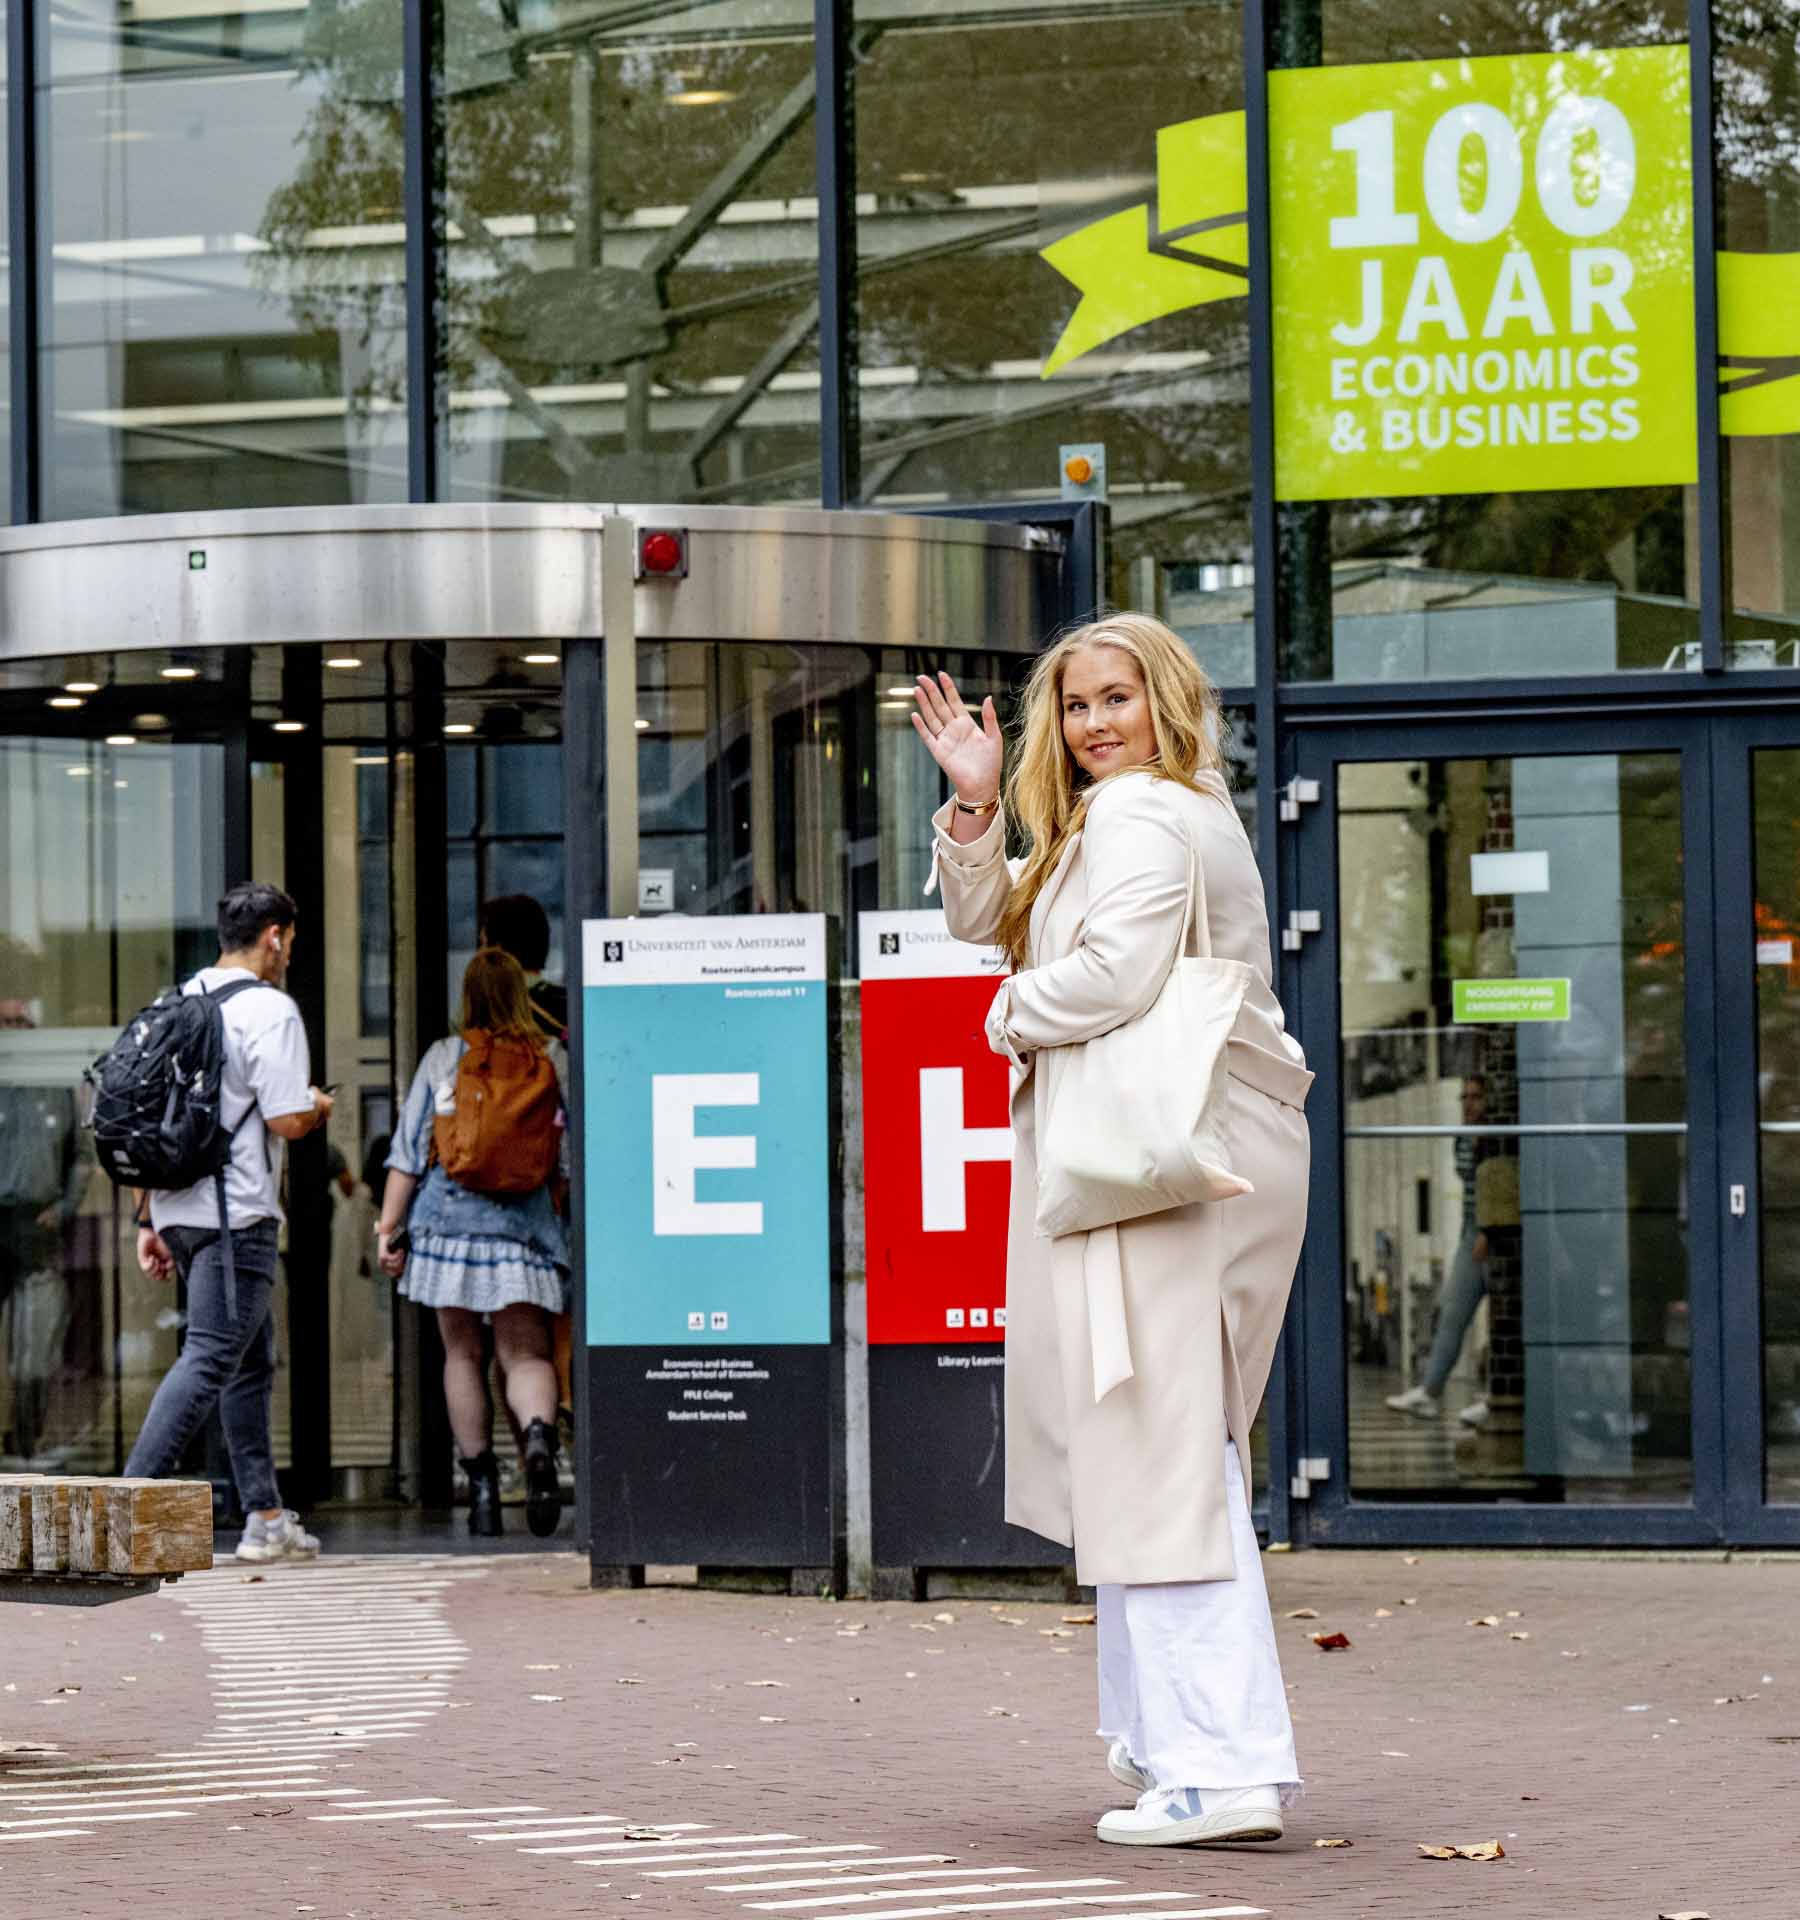 AMSTERDAM – Princess Amalia Princess of Orange today starts her studies at the University of Amsterdam and poses for the media at the start of her first study day, September 5, 2022. The princess is studying Politics, Psychology, Law and Economics